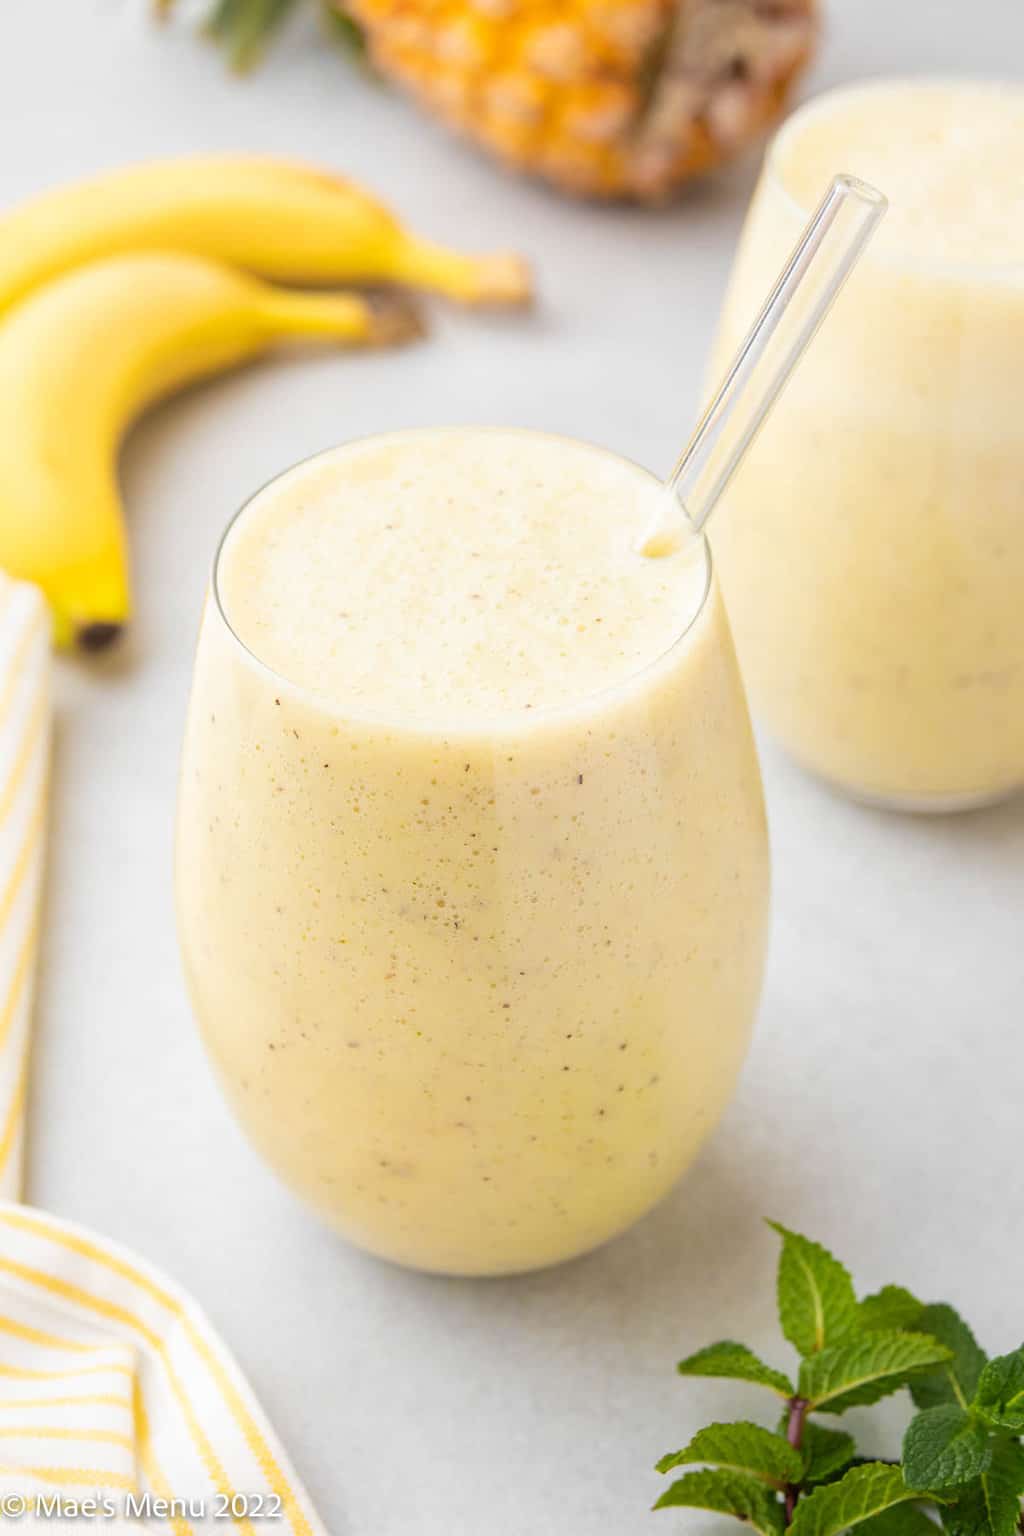 Two glasses of pineapple banana smoothie with bananas and a pineapple in the background.